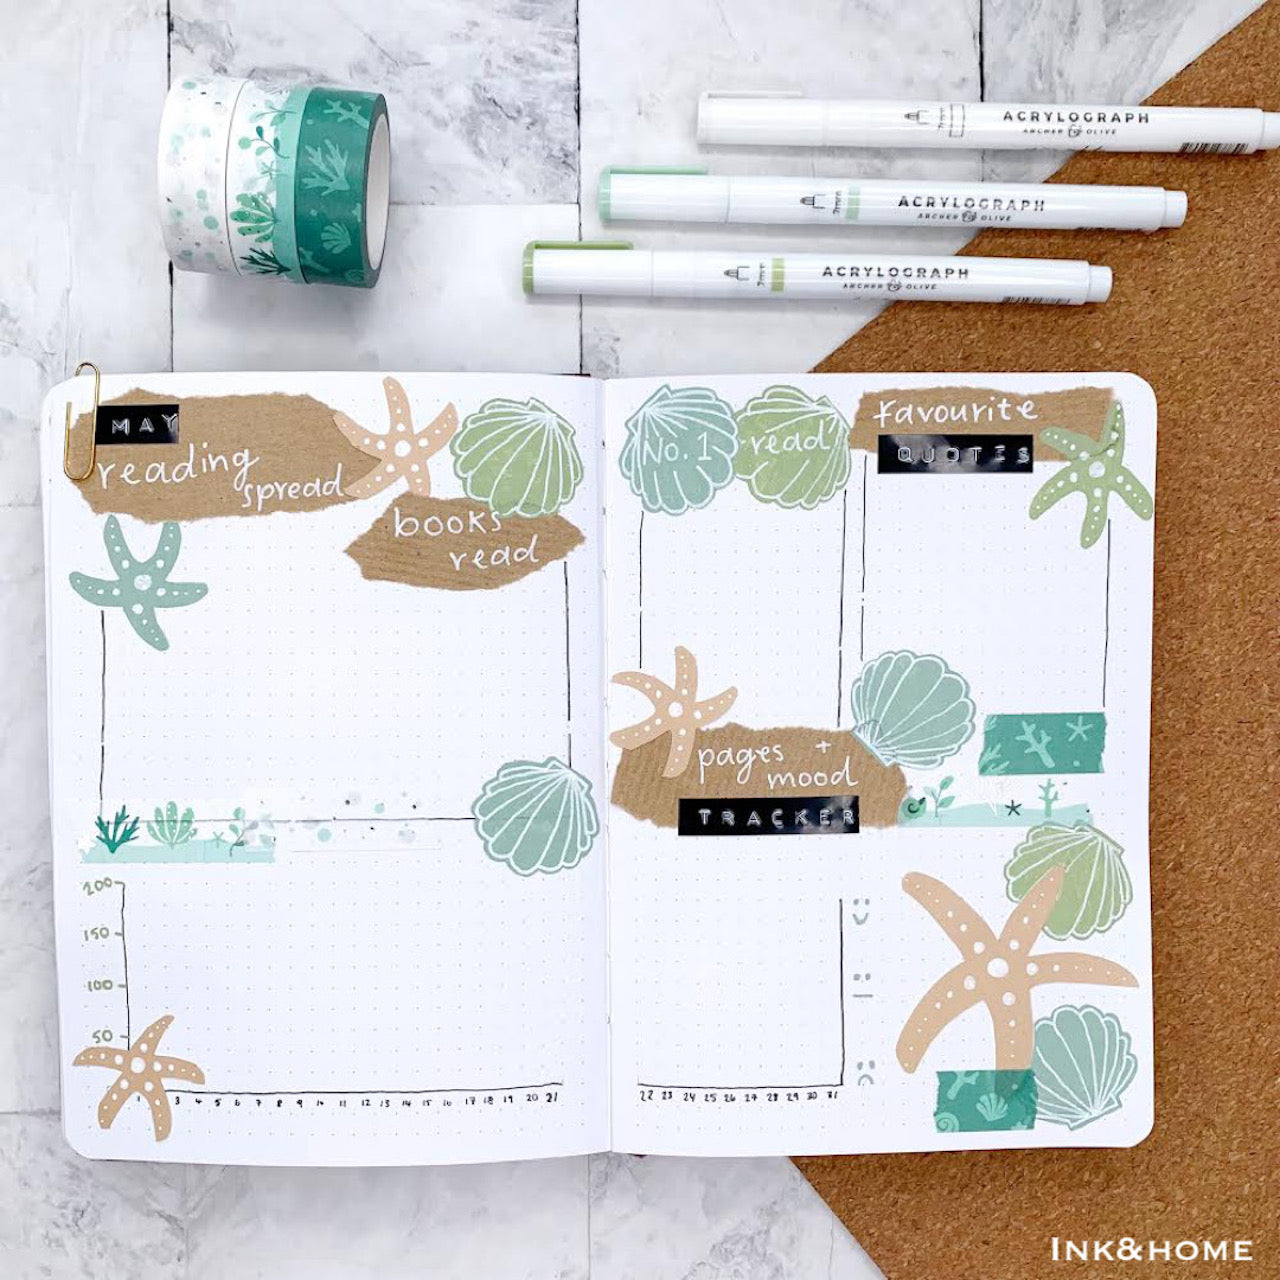 Inspirational bullet journal ideas for a new month